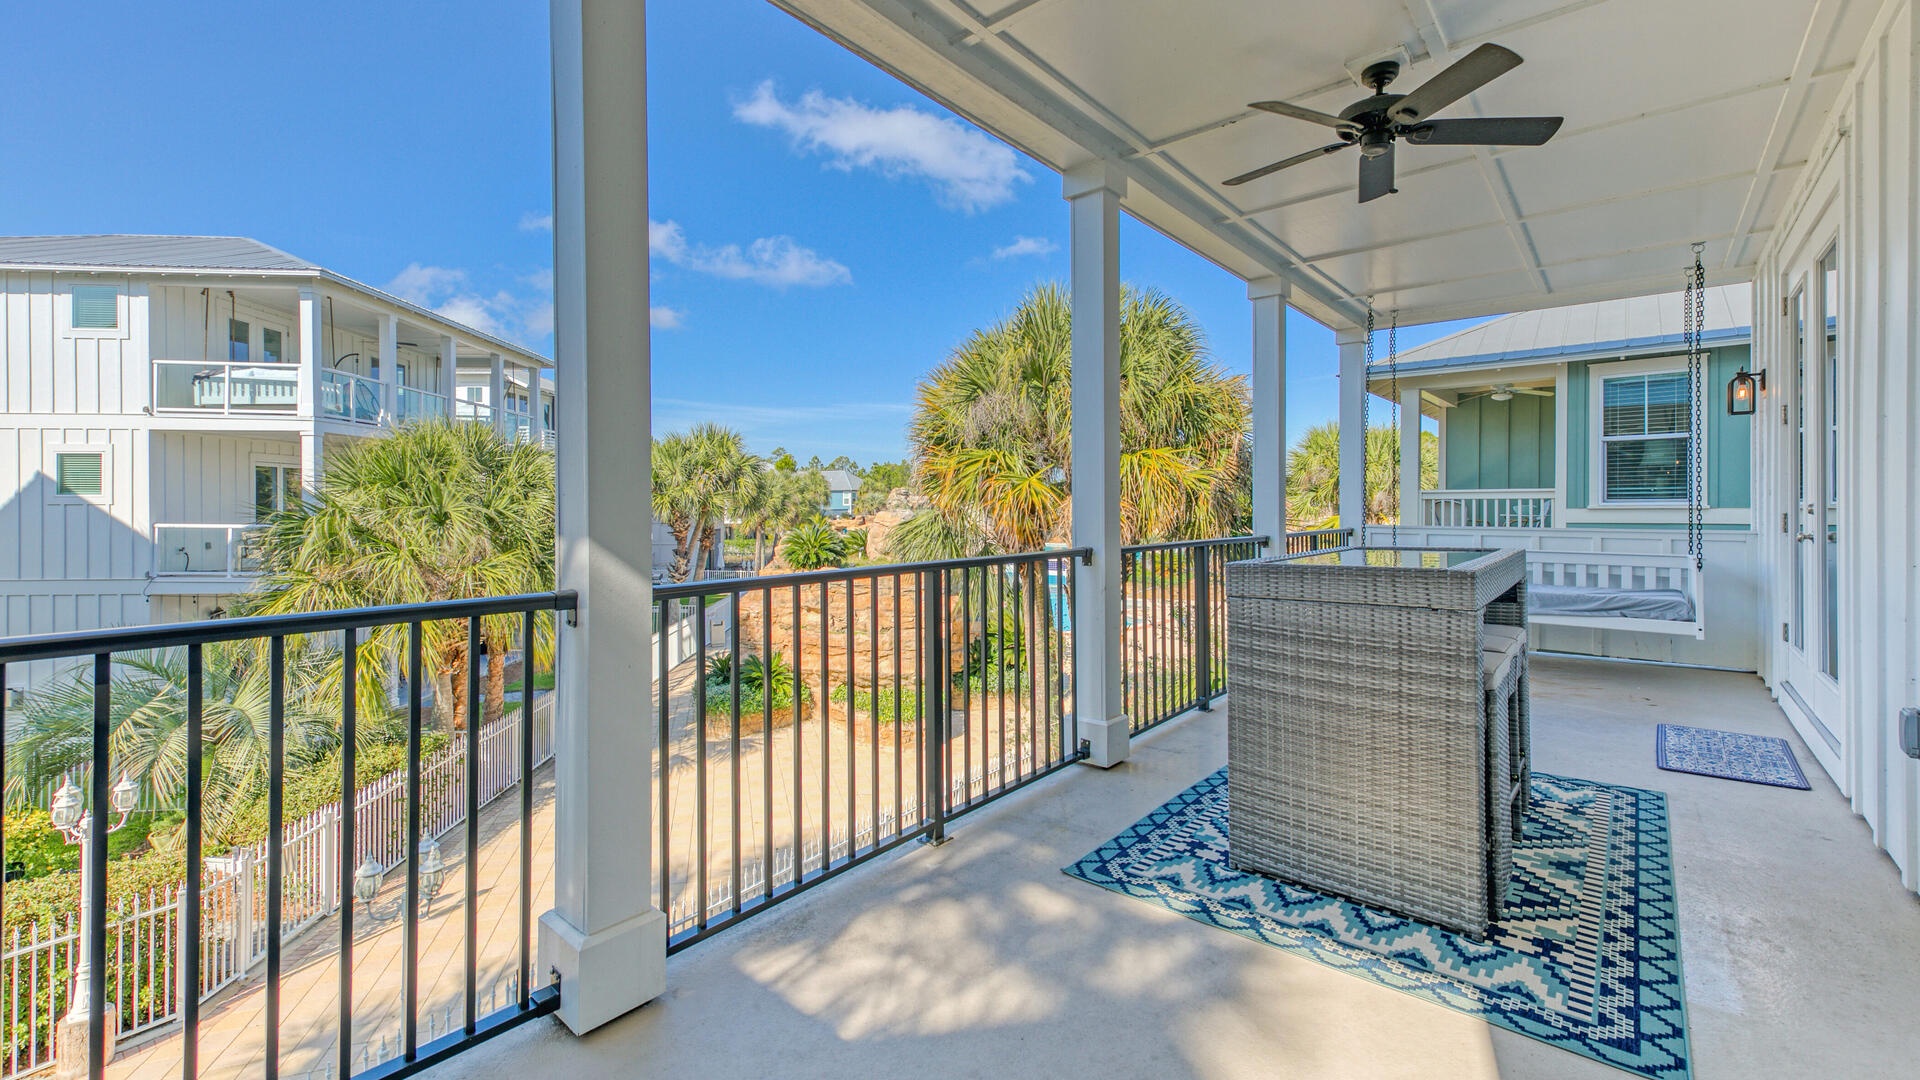 The living/kitchen balcony includes a large BBQ grill and high-top table!